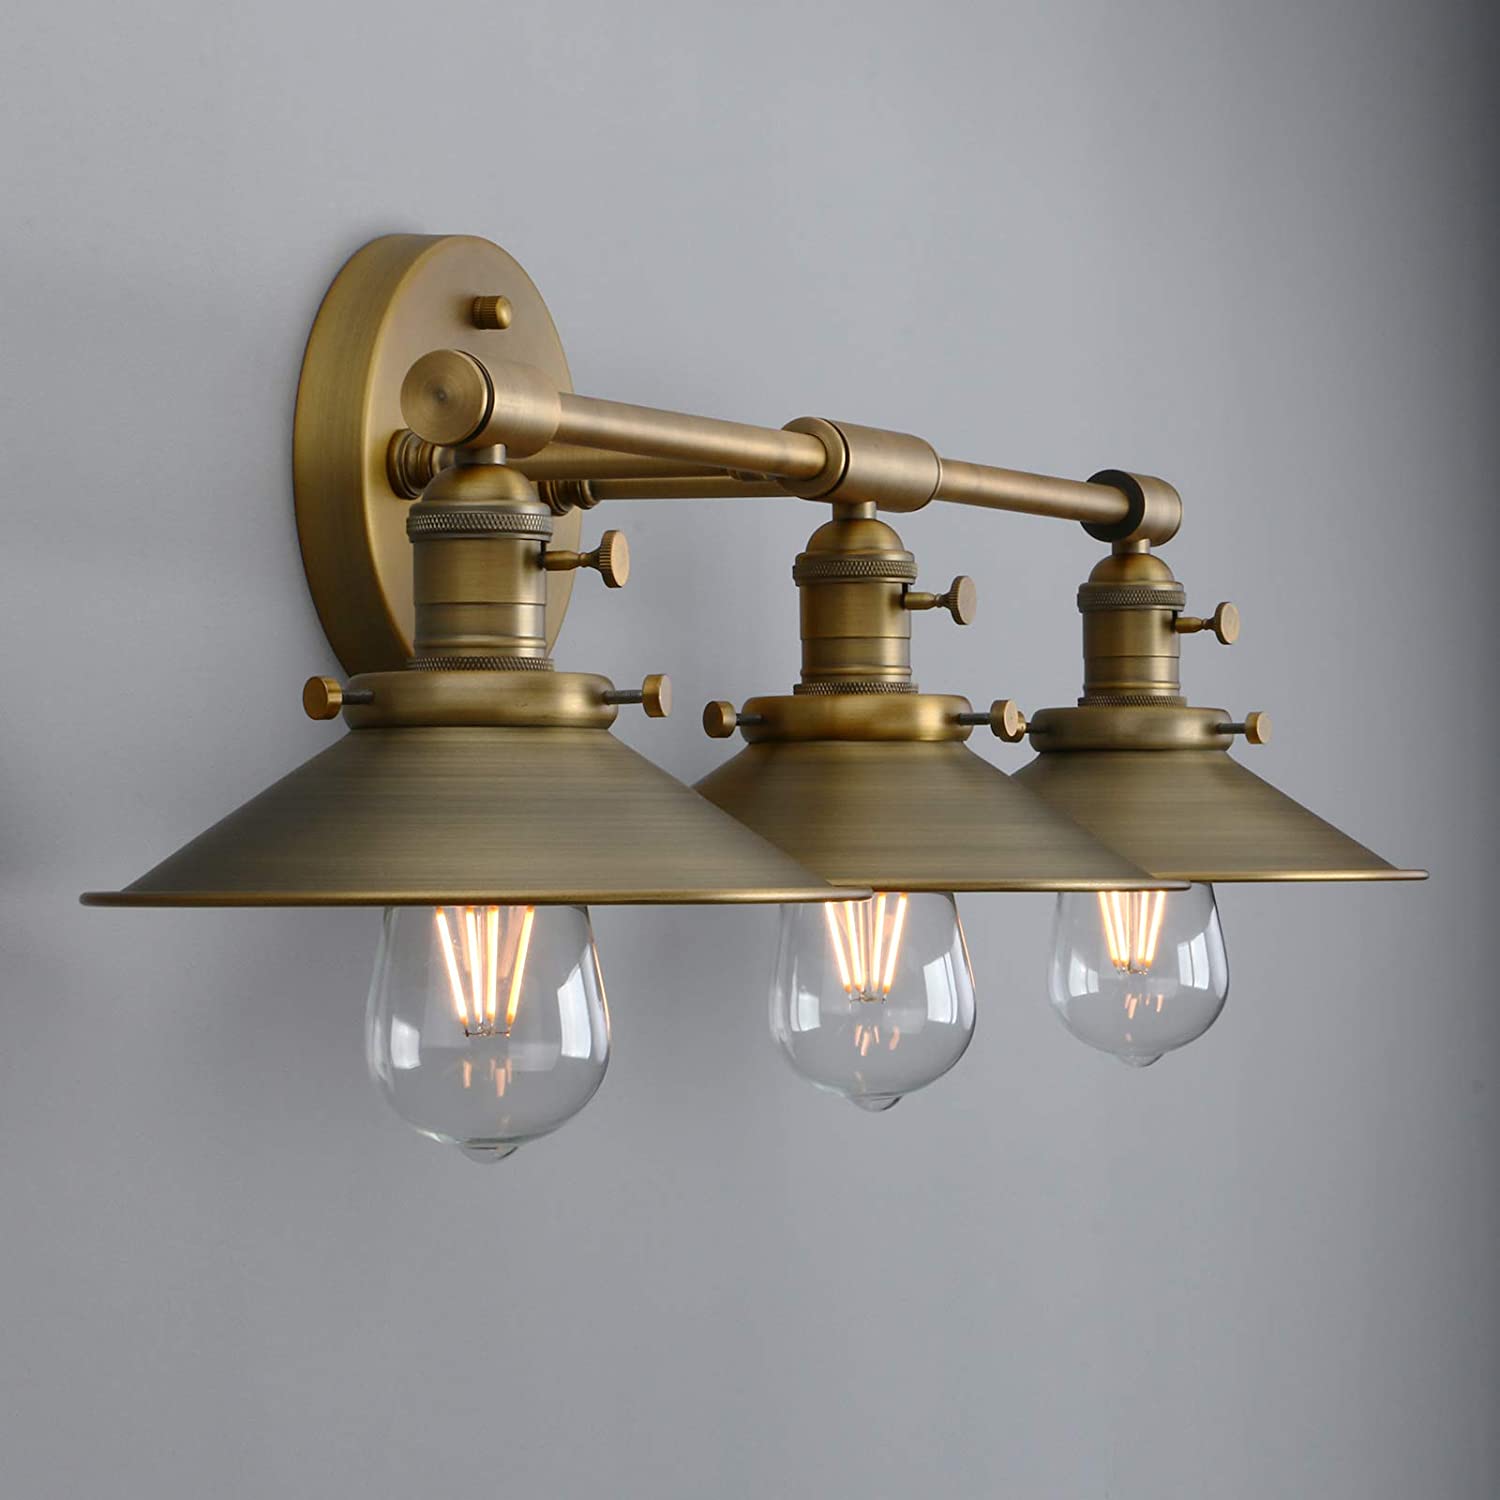 3 light antique industrial wall light sconce